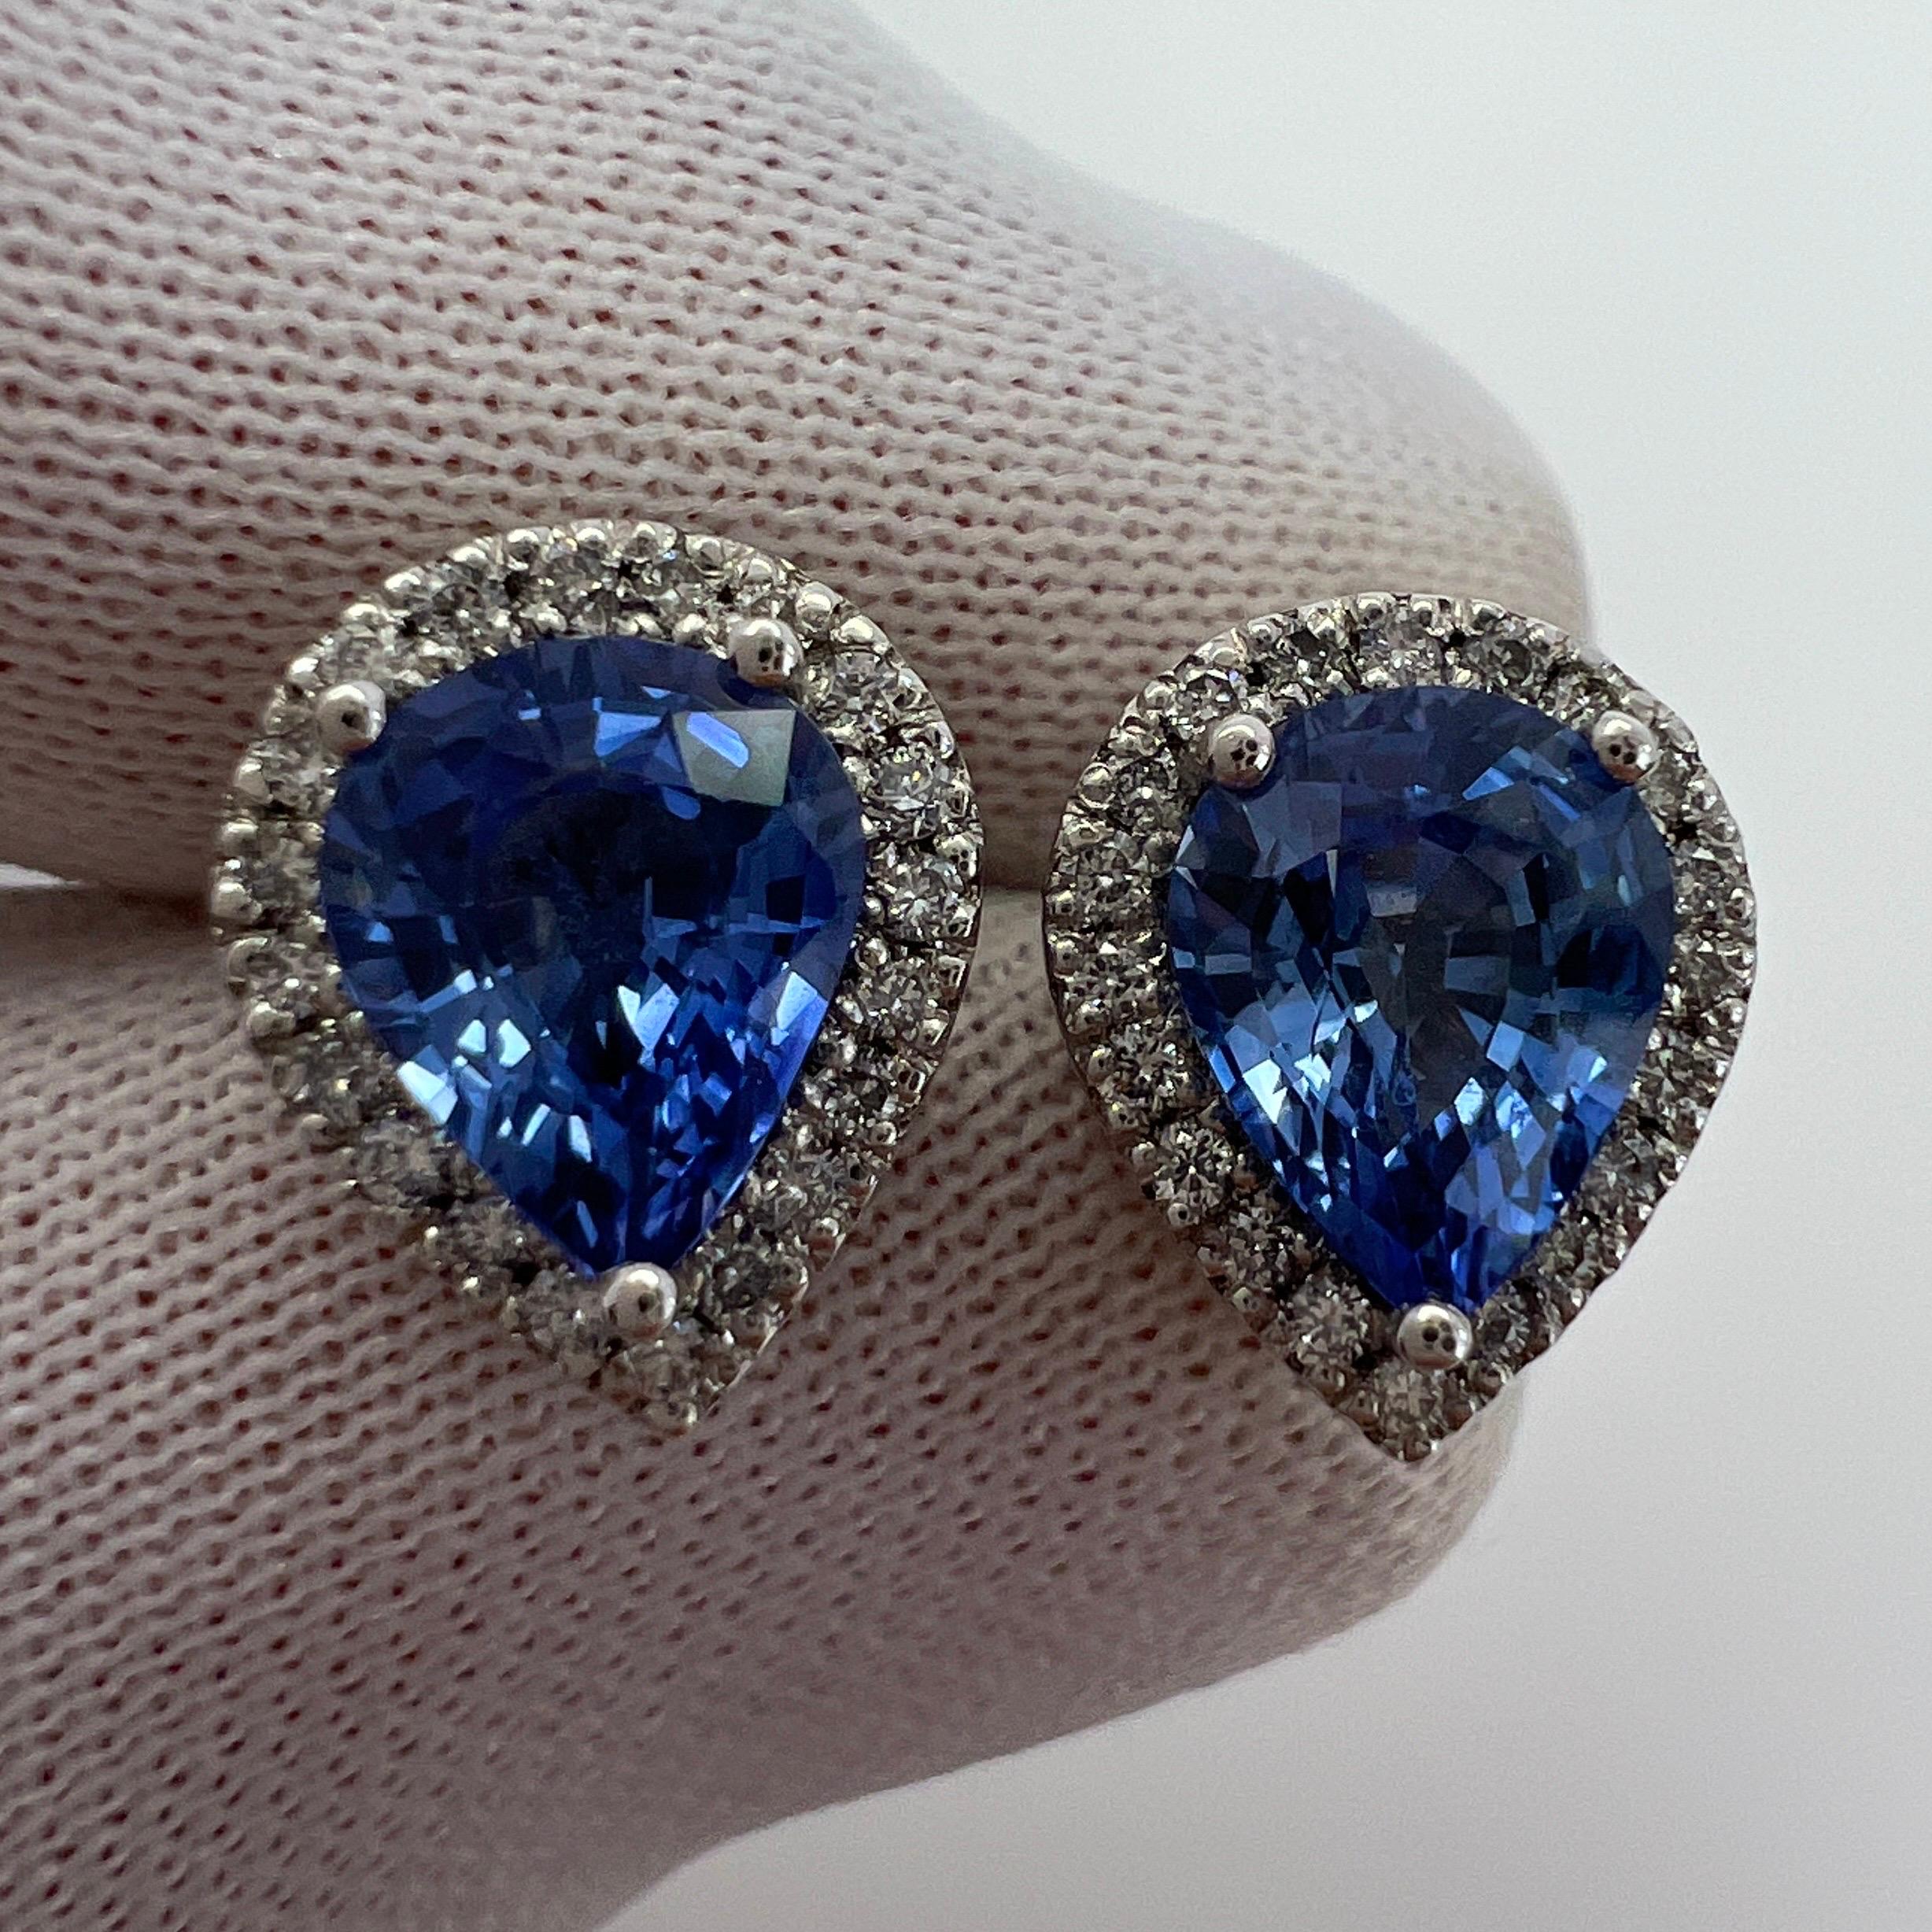 2.70Tcw Top Grade Ceylon Cornflower Blue Sapphire & Diamond 18k White Gold Earring Halo Studs.

Fine blue 2.50ct Ceylon sapphires with a vivid cornflower blue colour, excellent clarity and an excellent pear teadrop cut. Fine quality and perfect